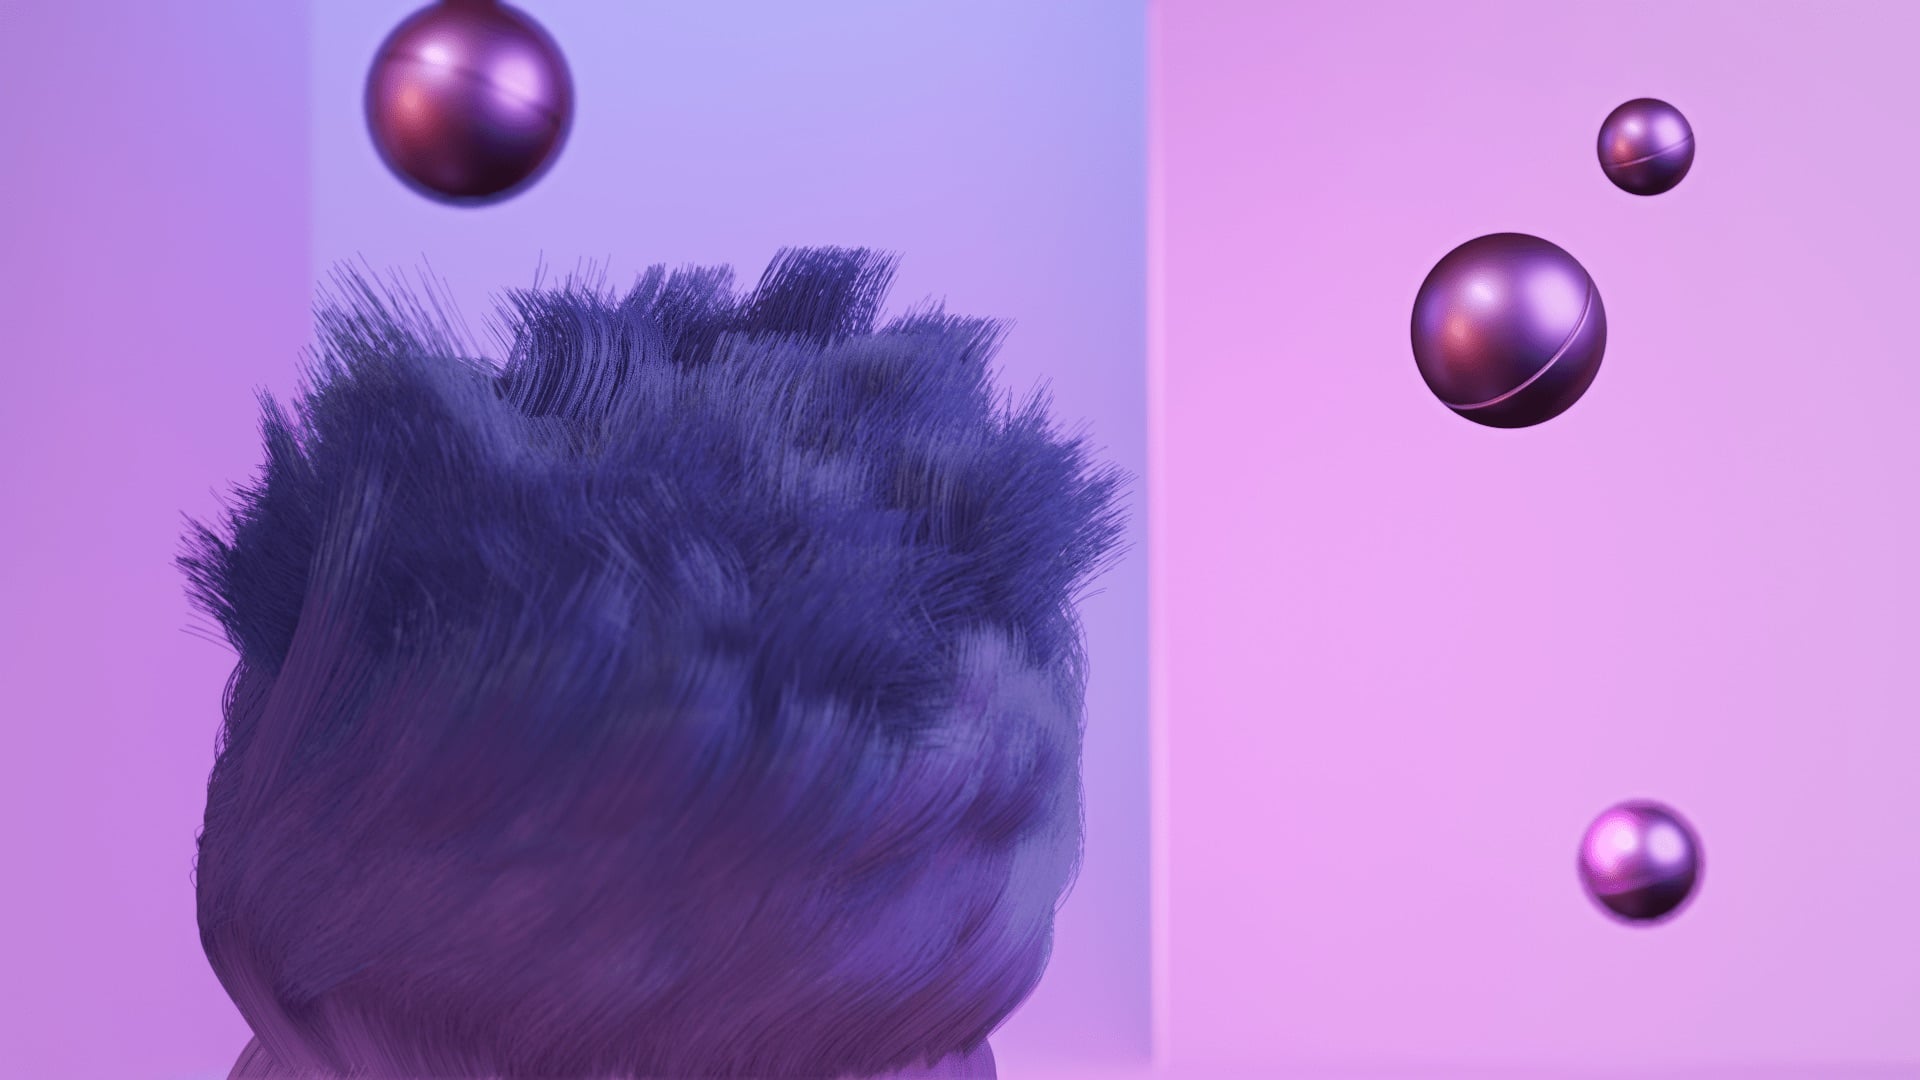 3D styleframe of an abstract hair simulation, with metal orbs floating around it